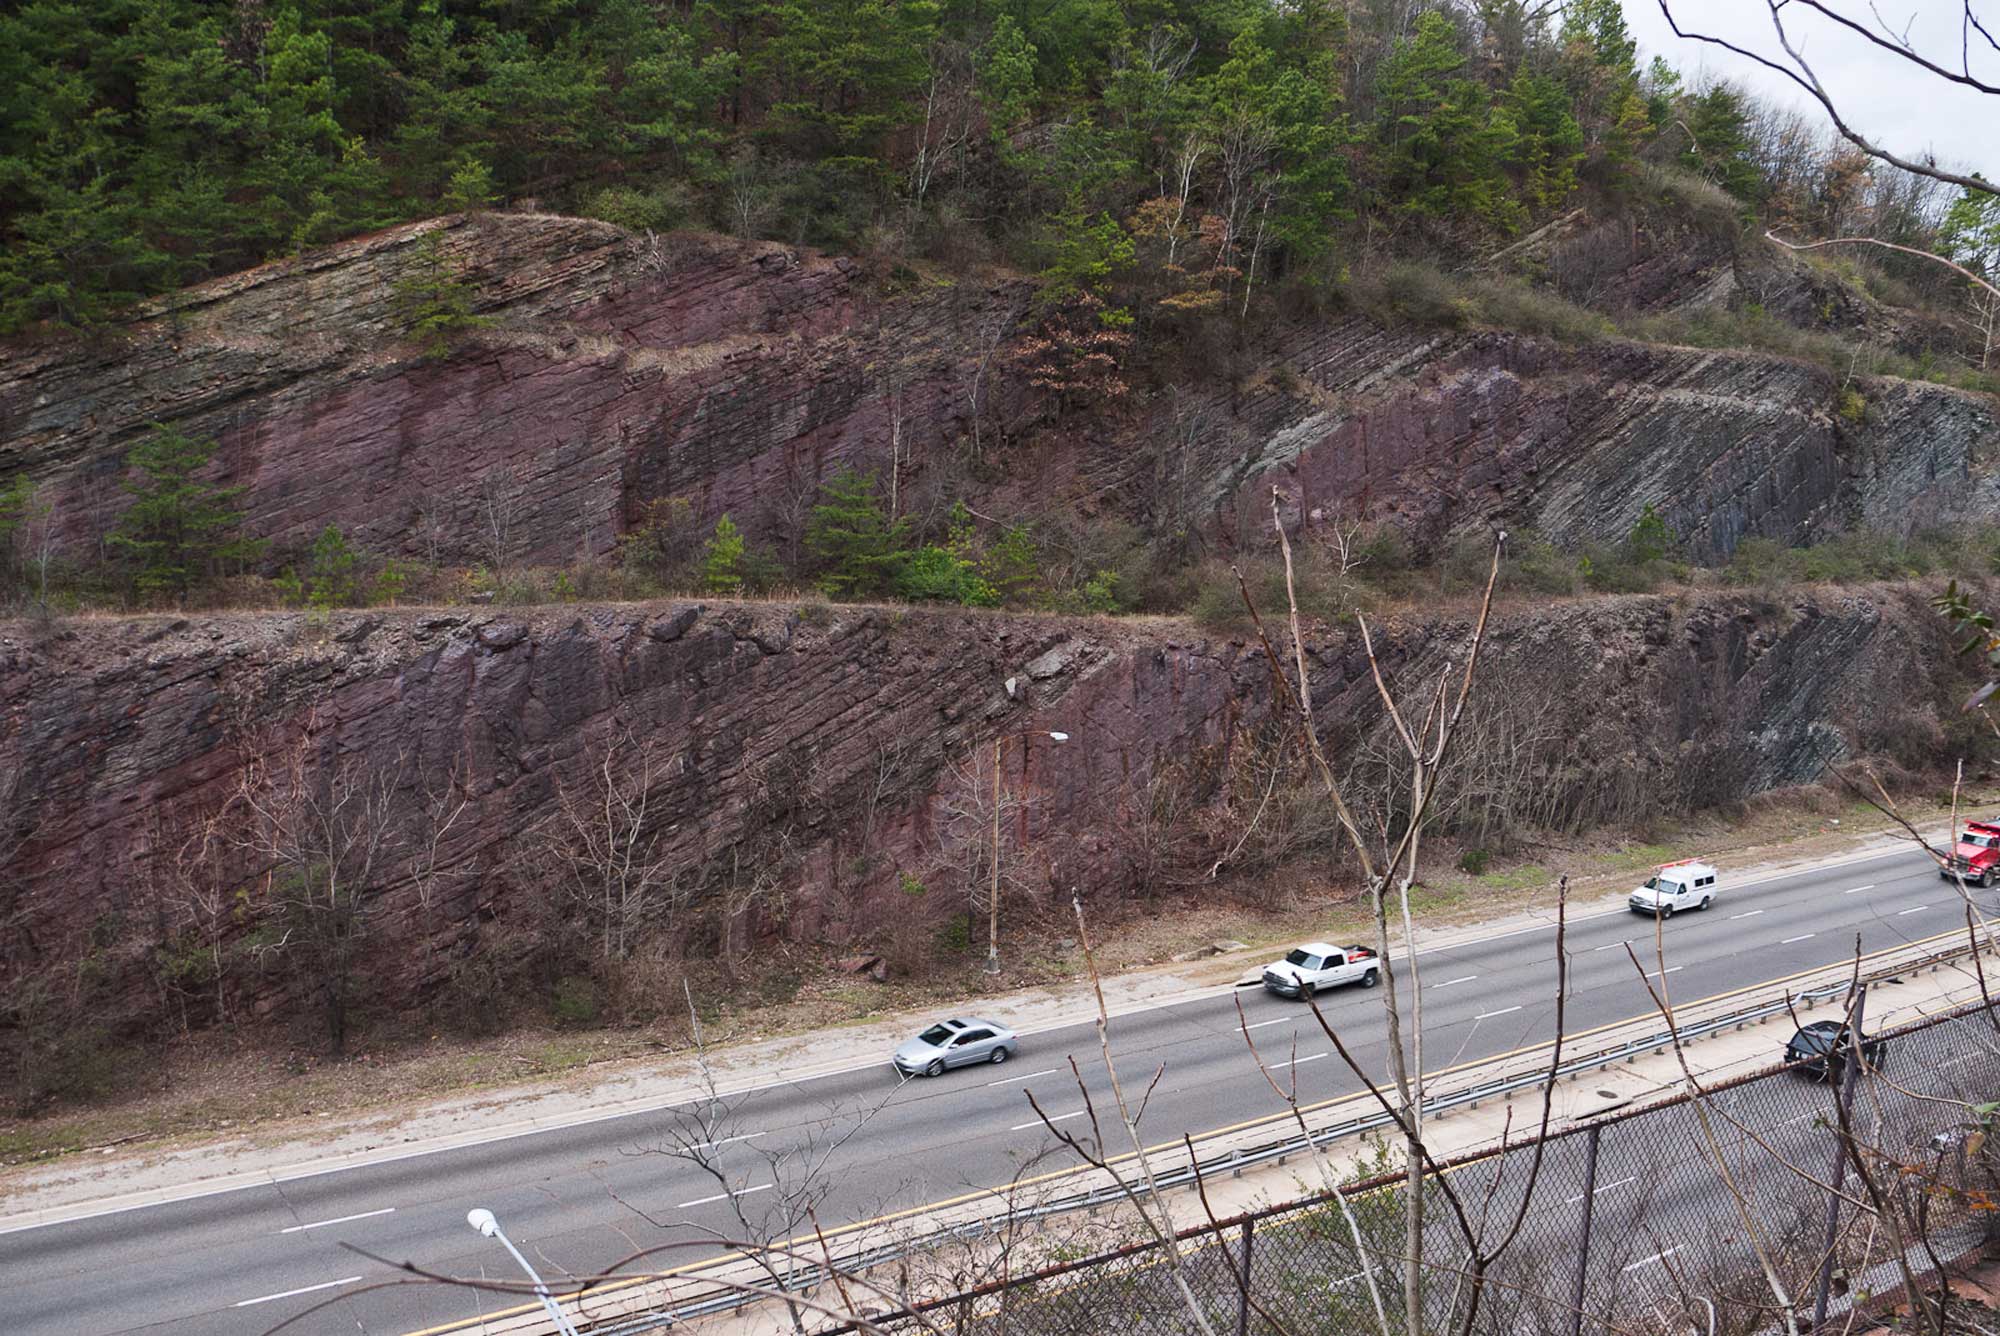 Photograph of a large outcropping of Silurian strata at Red Mountain, Alabama.